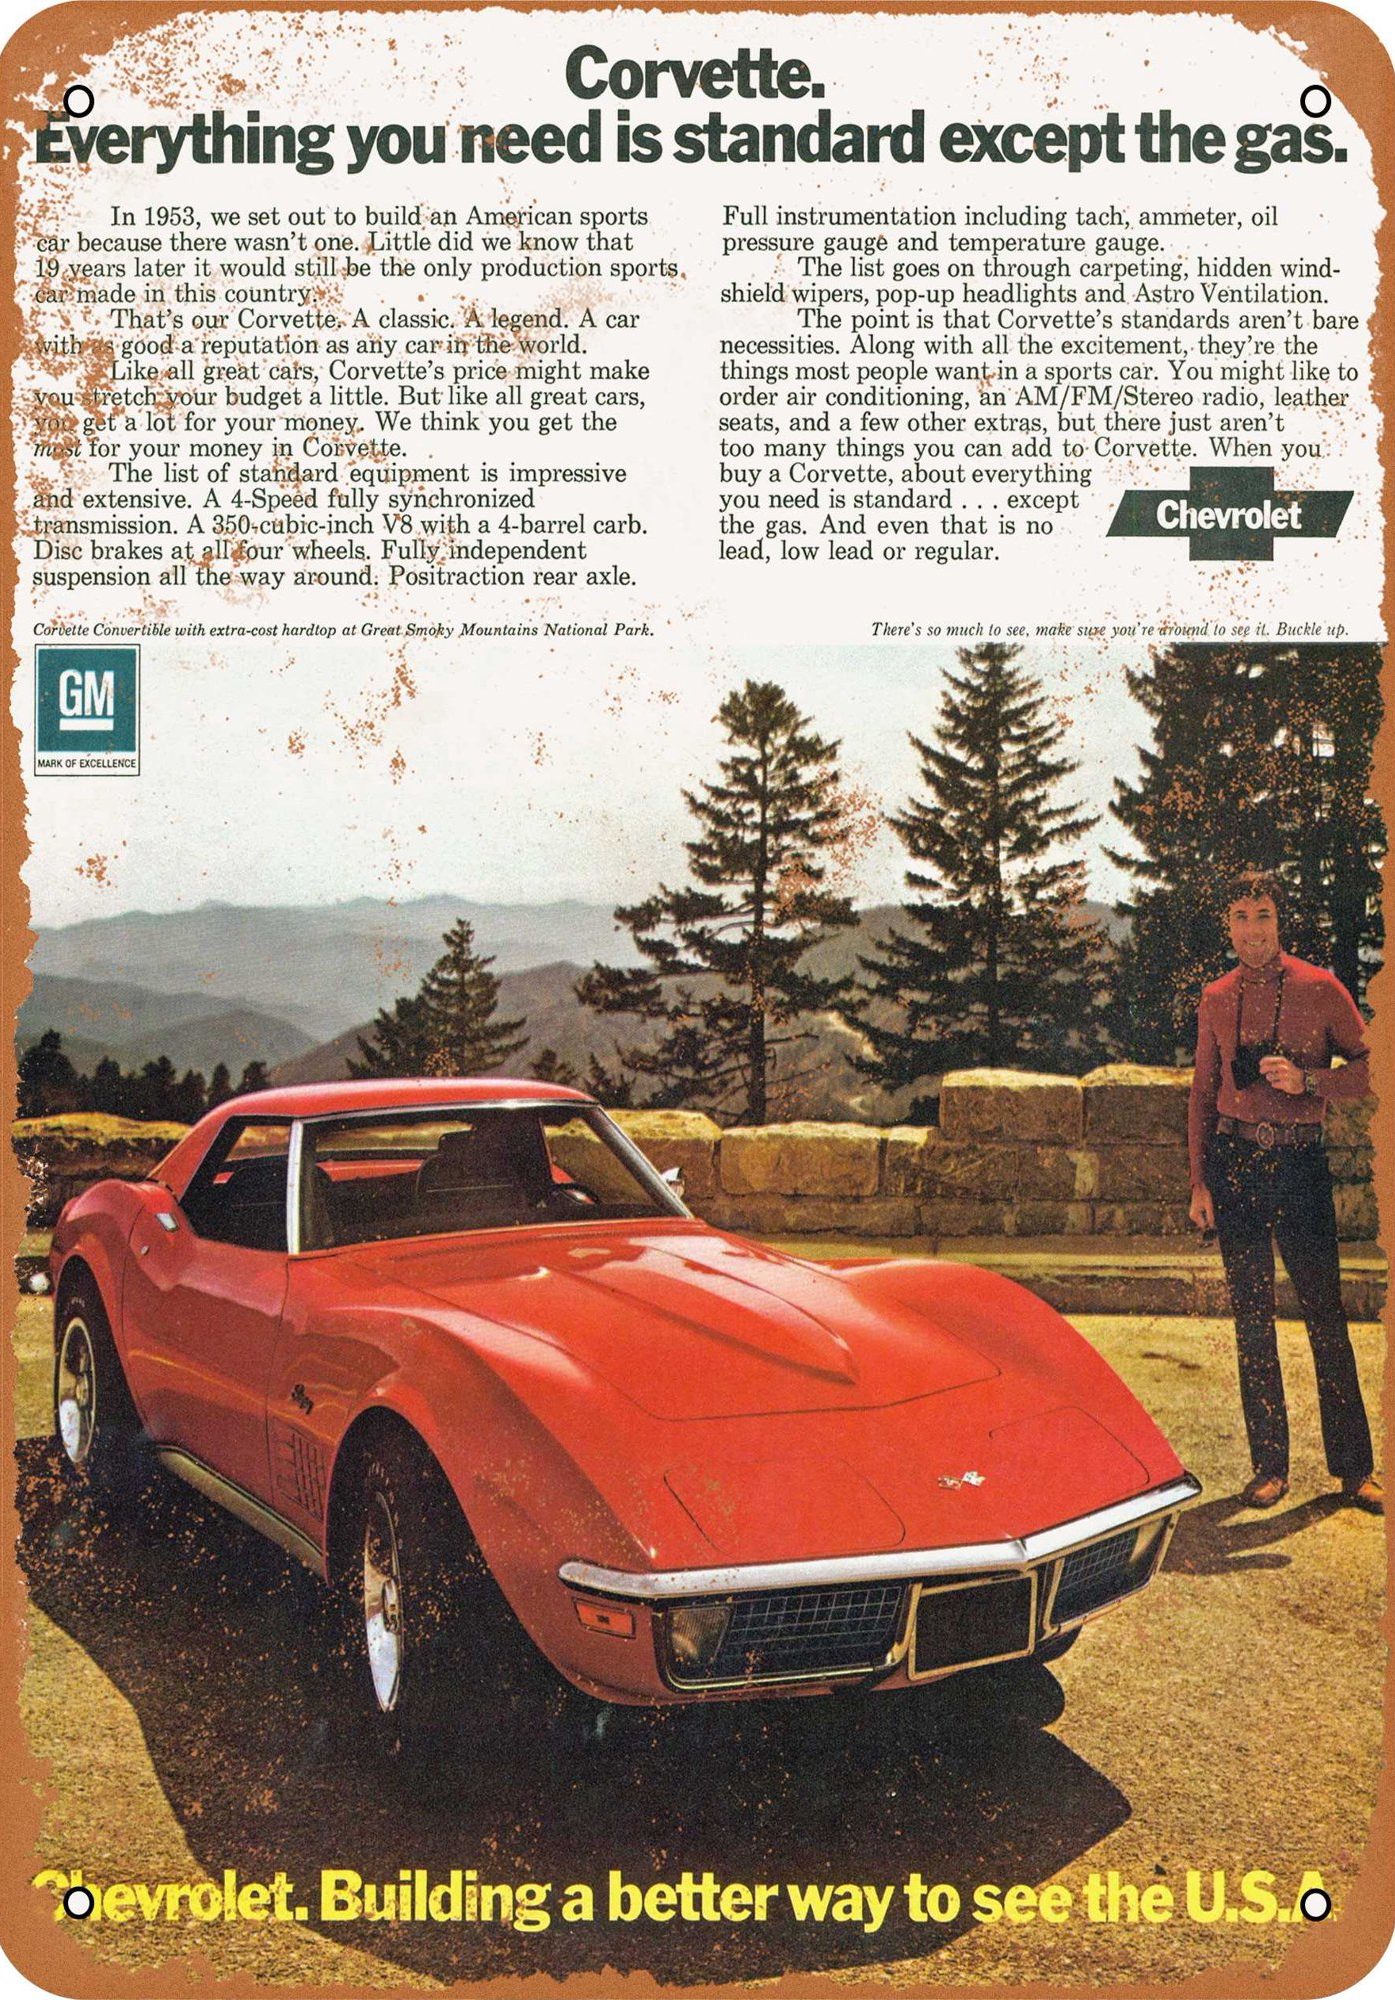 A GM Advertisement for the 1972 Chevrolet Corvette. (Image courtesy of GM Media.